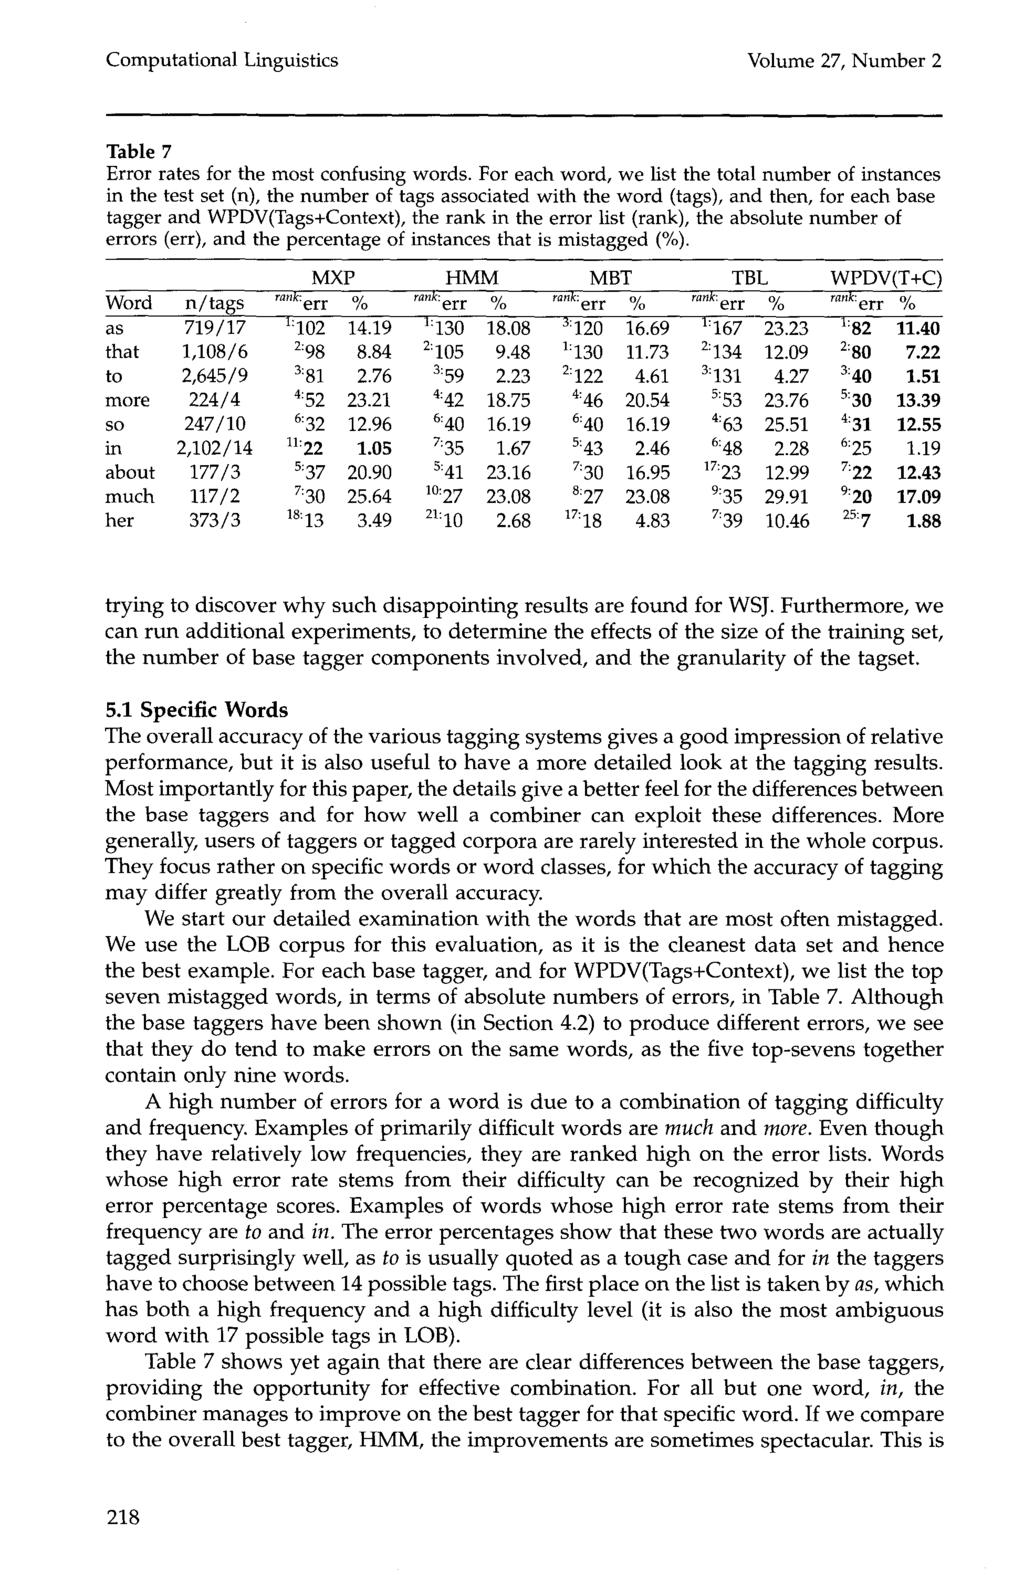 Computational Linguistics Volume 27, Number 2 Table 7 Error rates for the most confusing words.